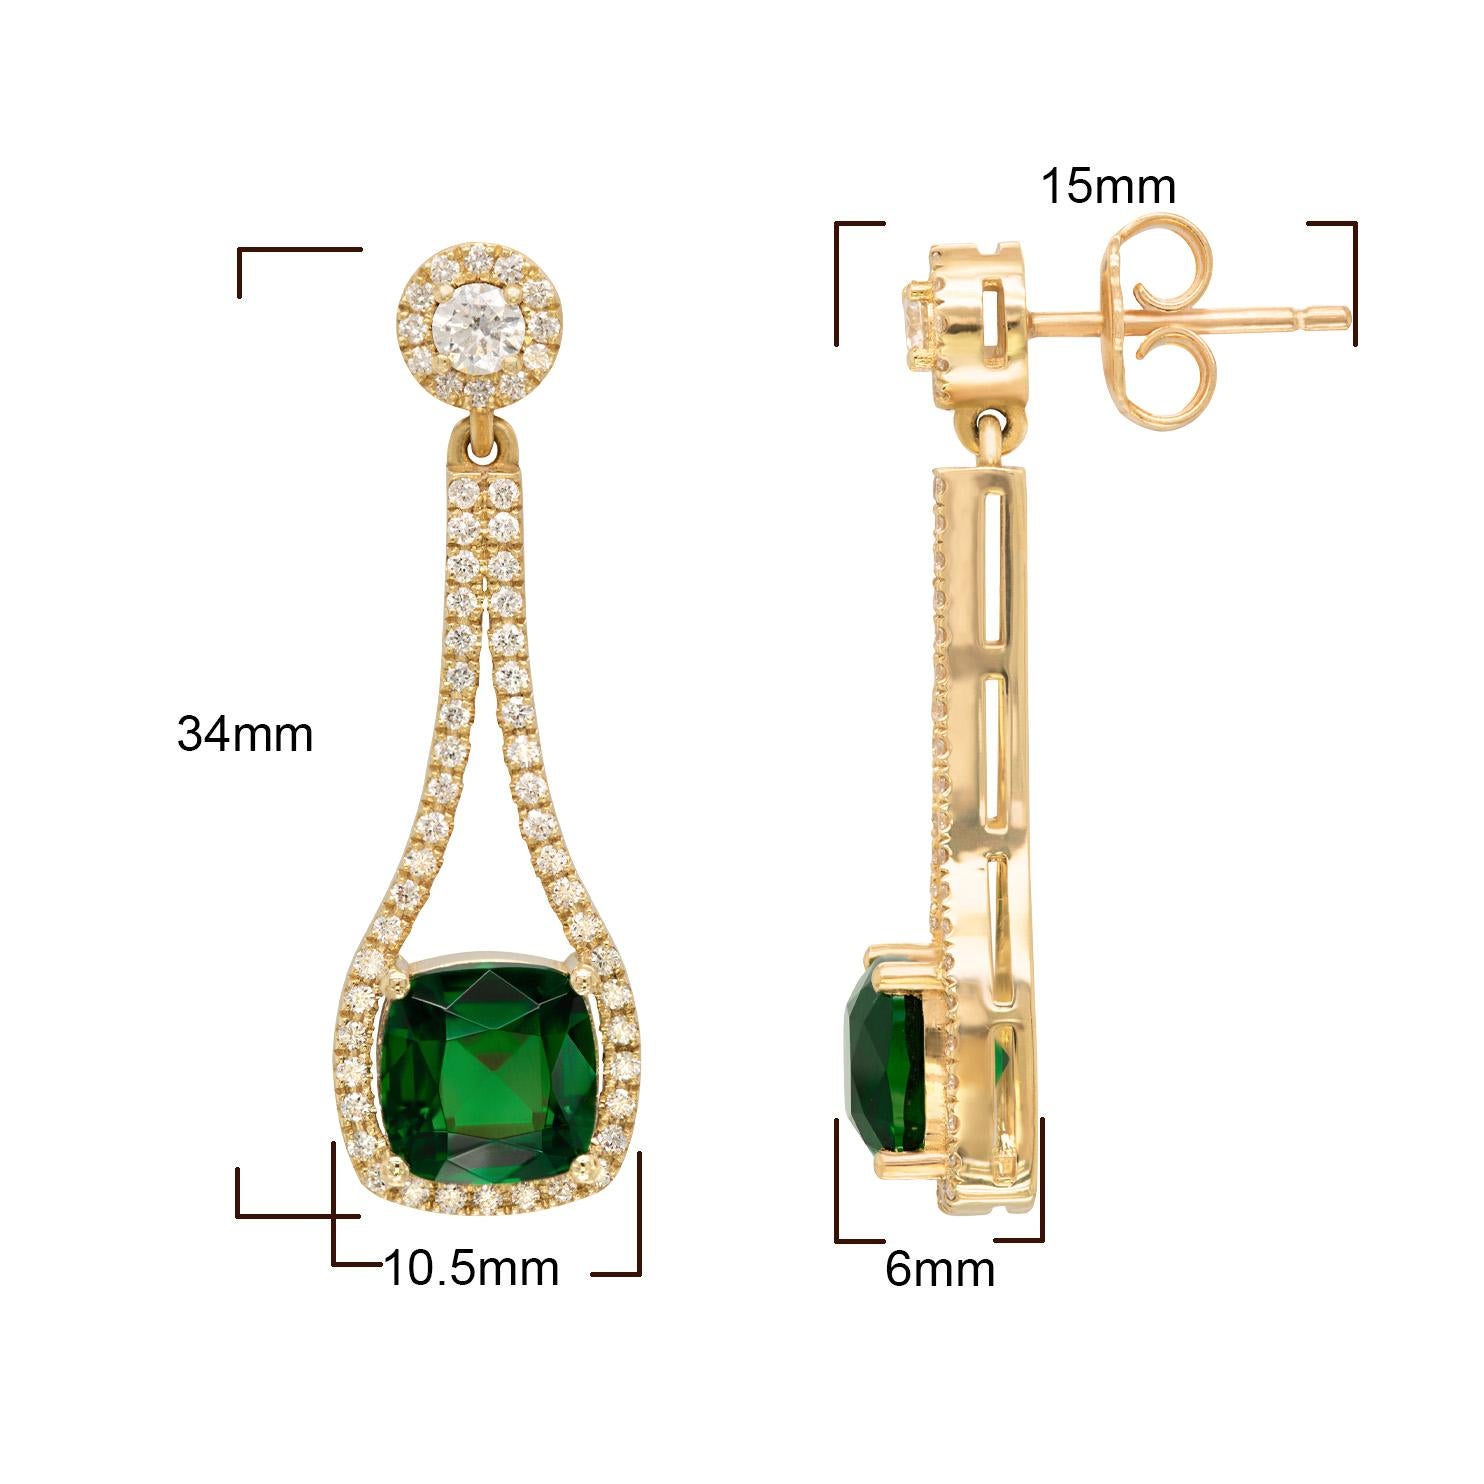 Natural Tourmalines 4.57 Carats set in 18K Yellow Gold Earrings with Diamonds 2